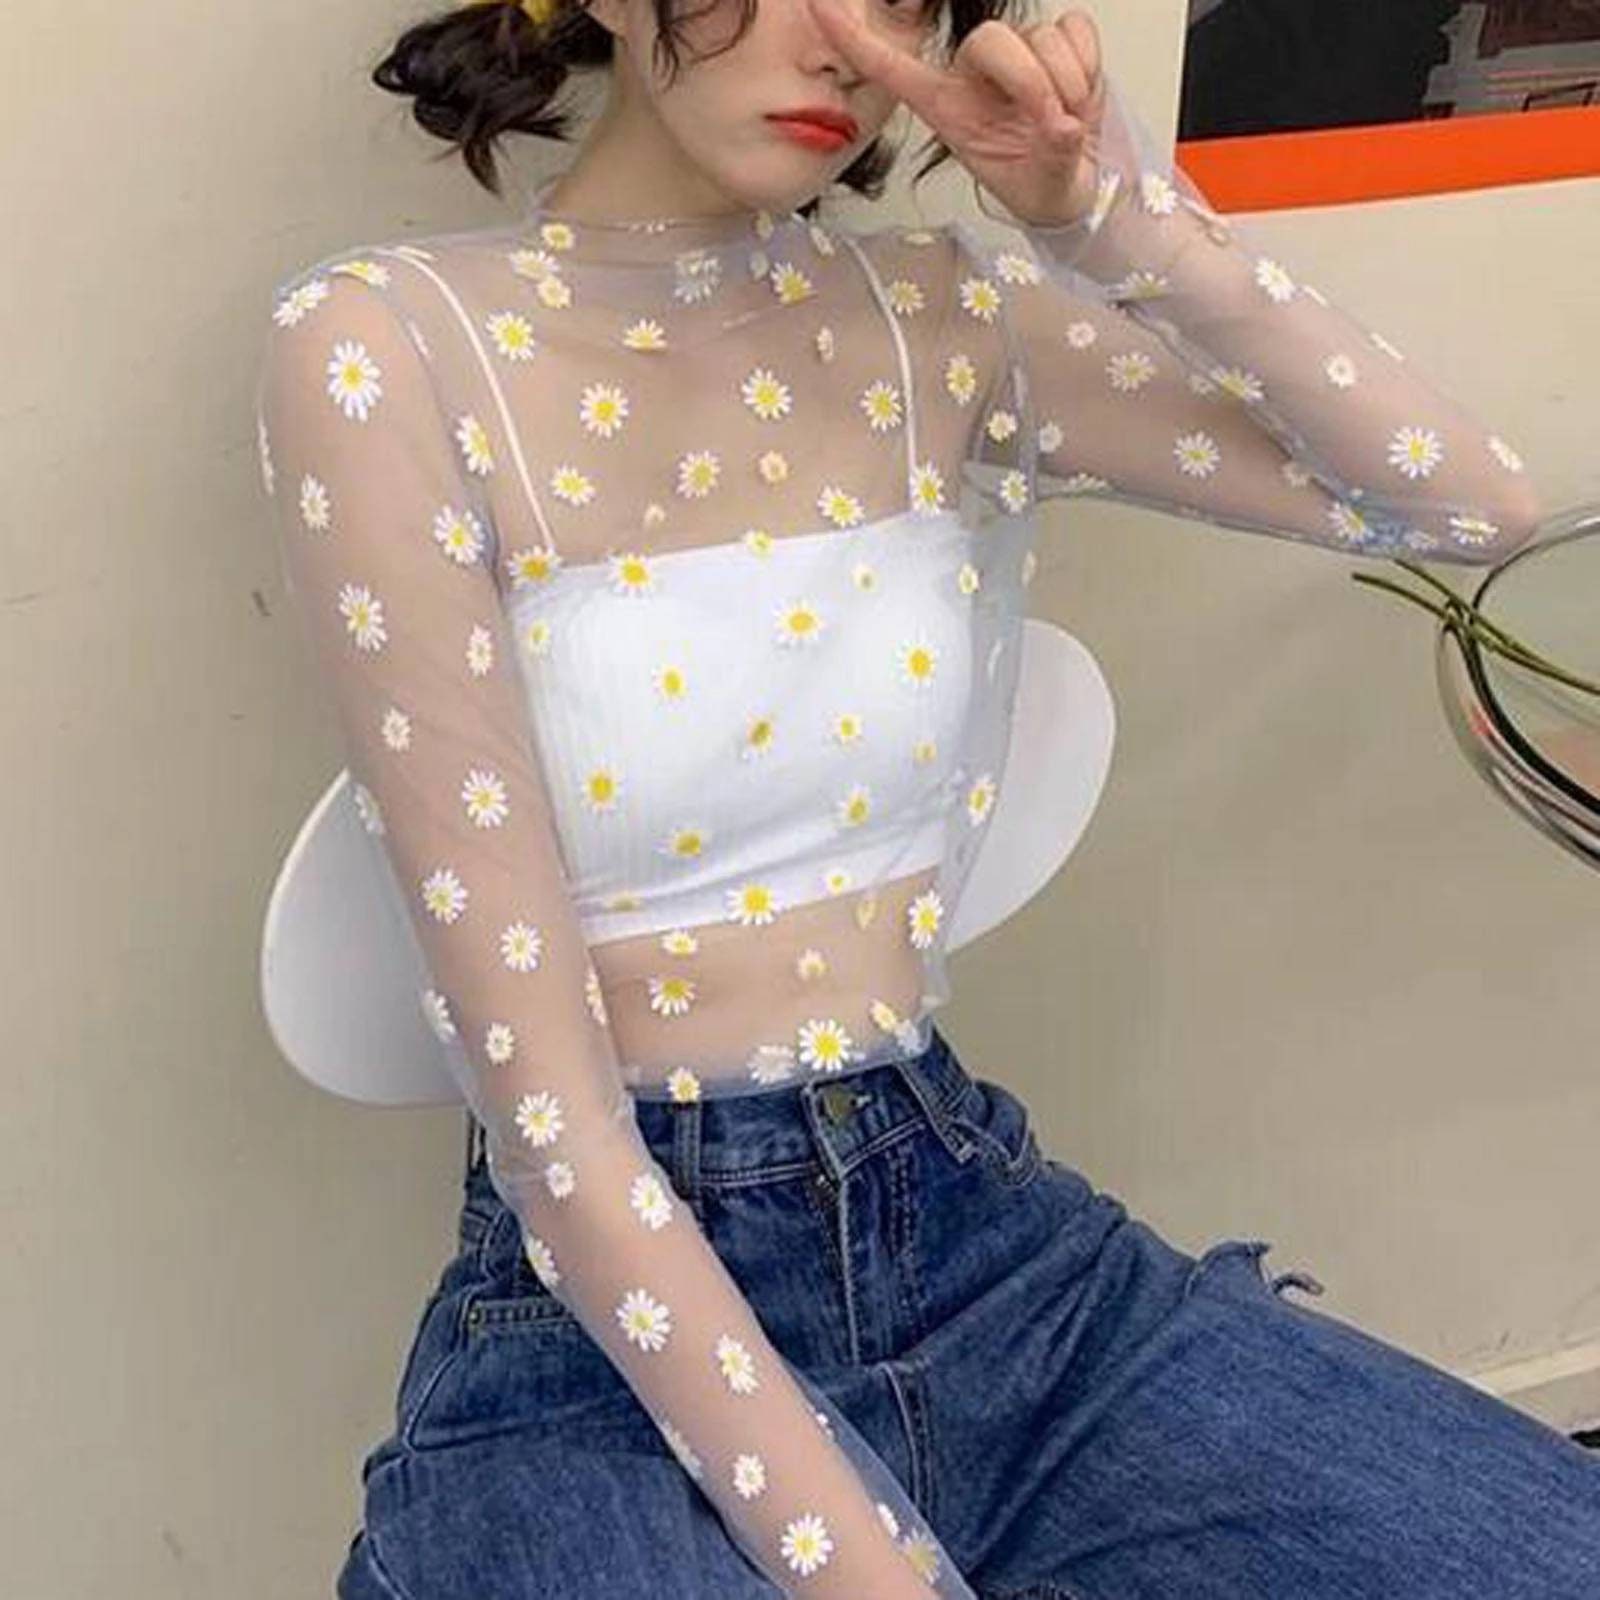 Daisy Flower Mesh Sheer Blouse Casual Aesthetic See-Through | Etsy